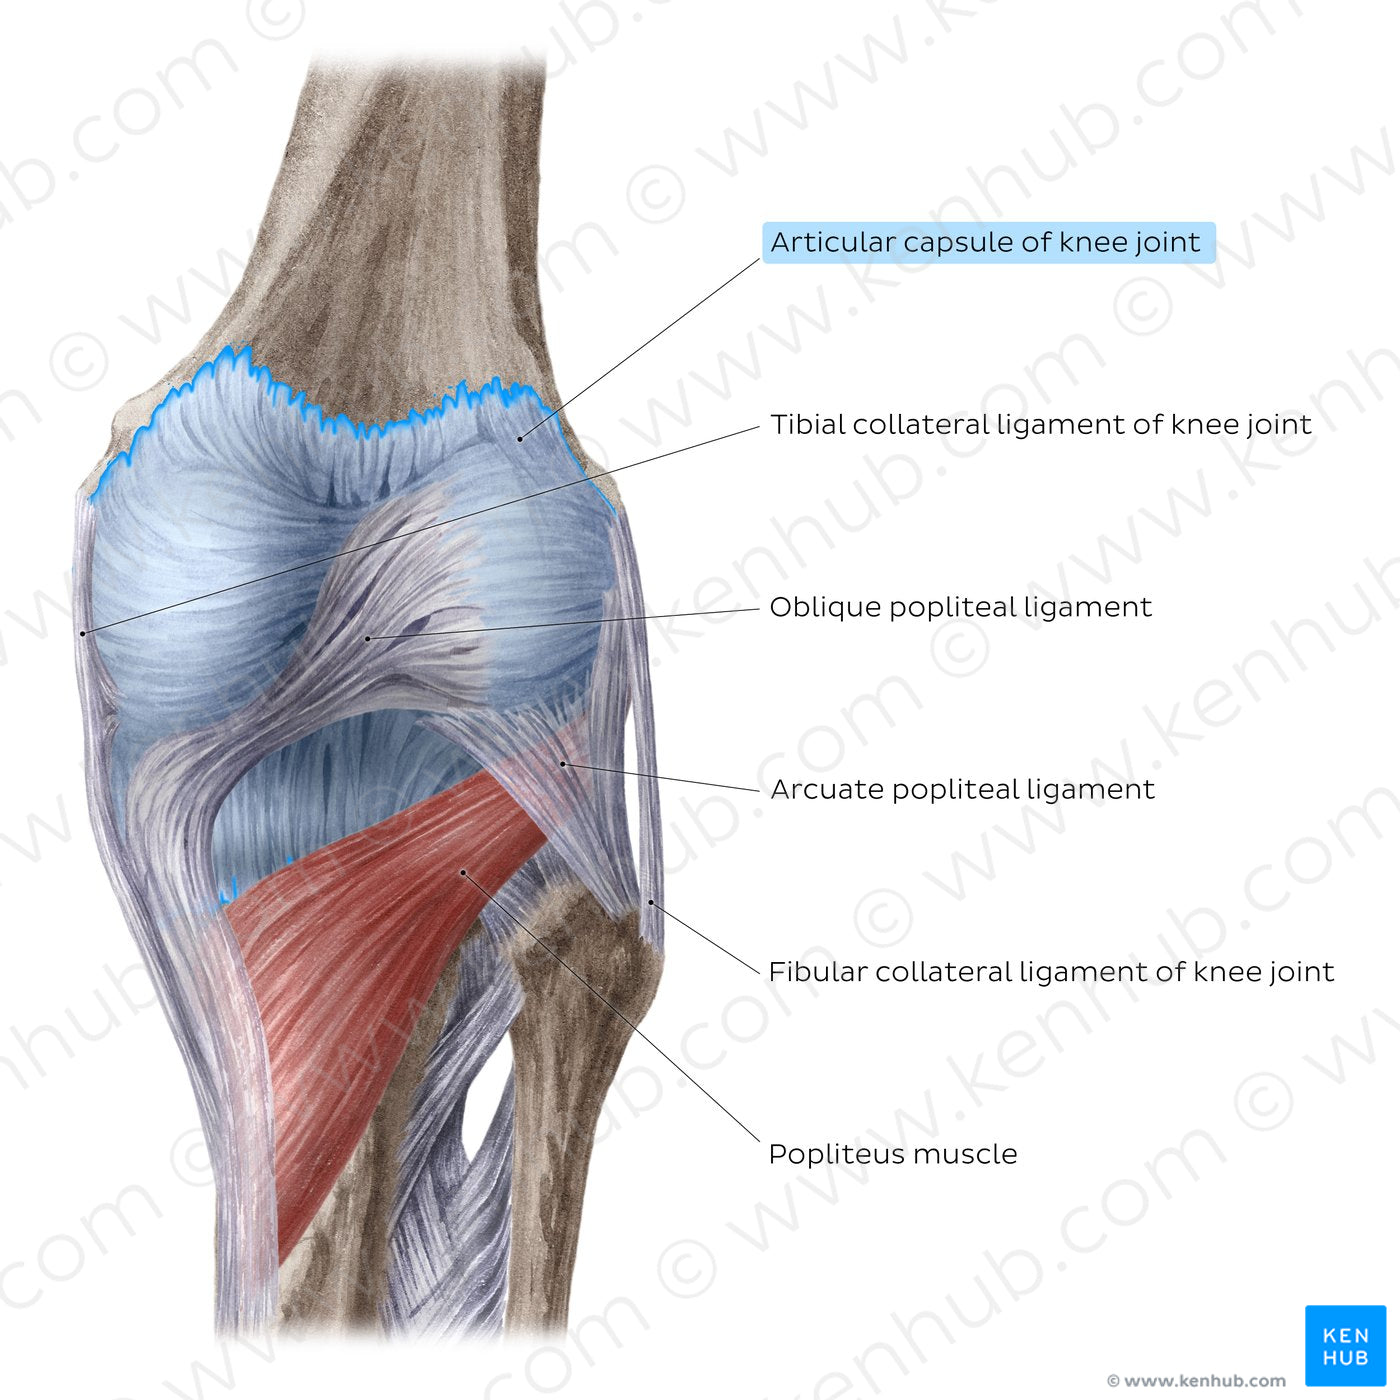 Knee joint: Extracapsular ligaments and popliteus muscle (posterior view) (English)